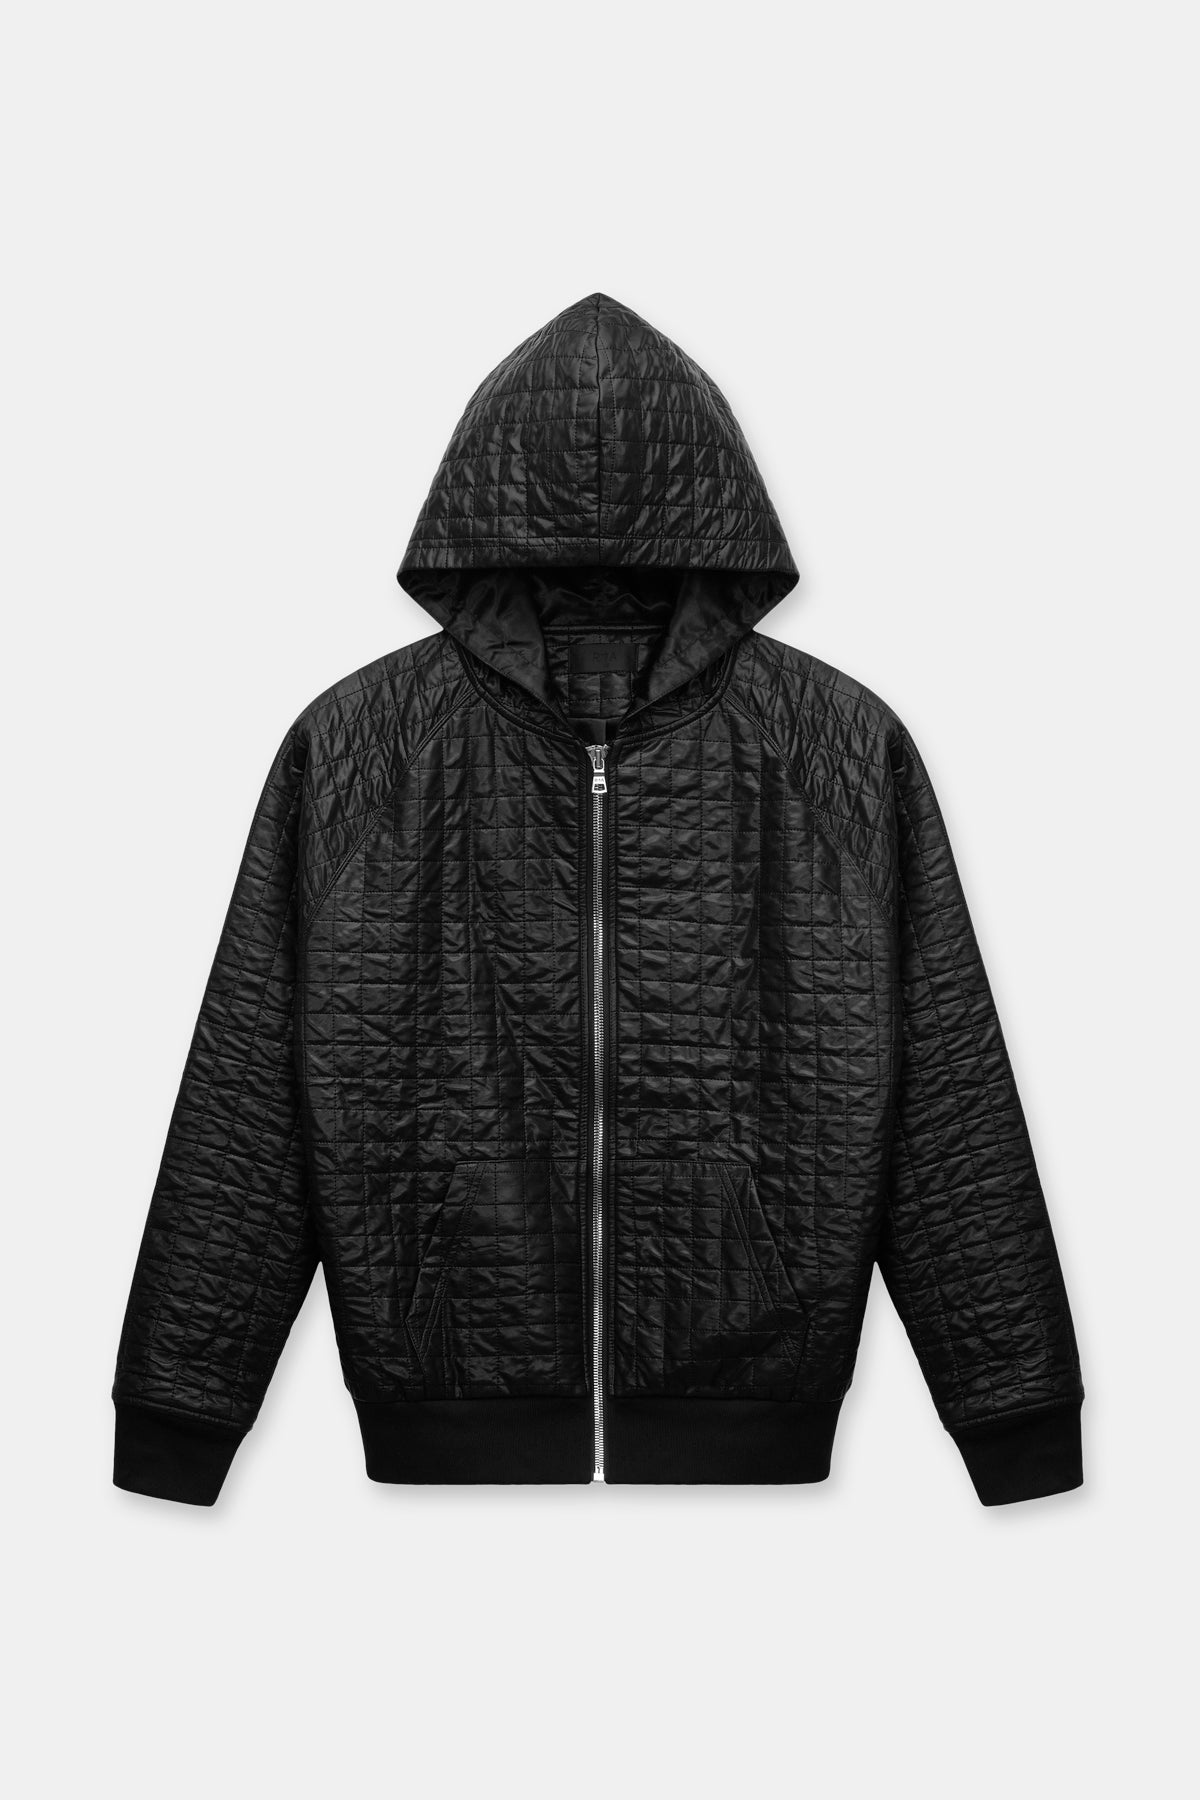 SIMION SWEATSHIRT | BLACK QUILTED